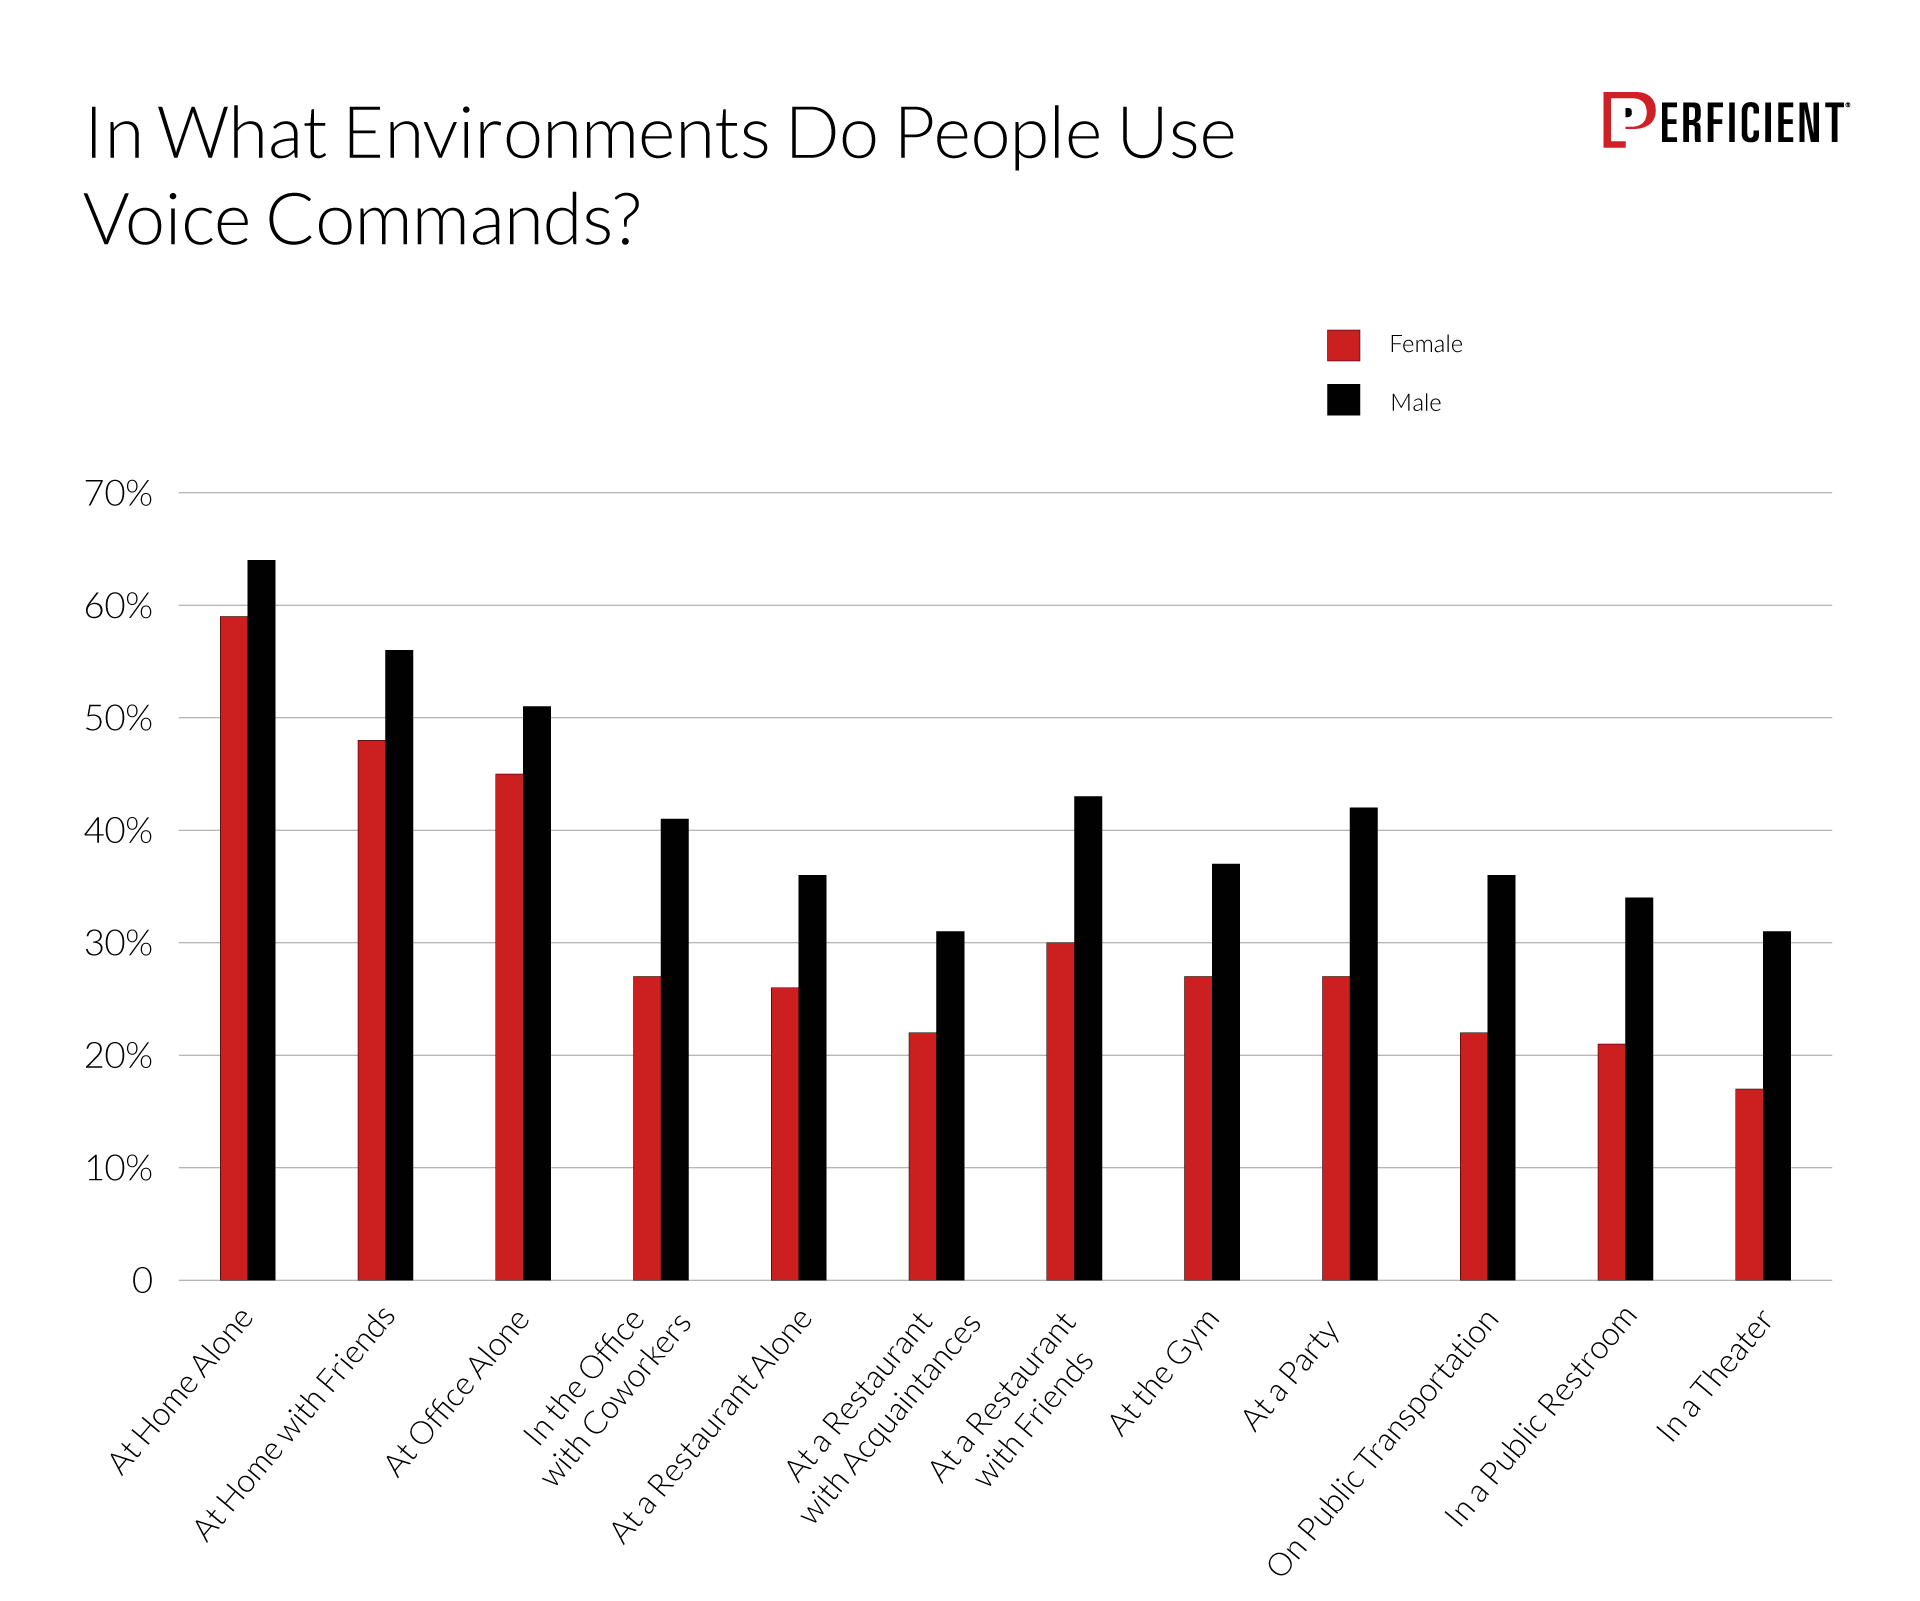 Chart shows how likely people would use voice commands in different environments by gender